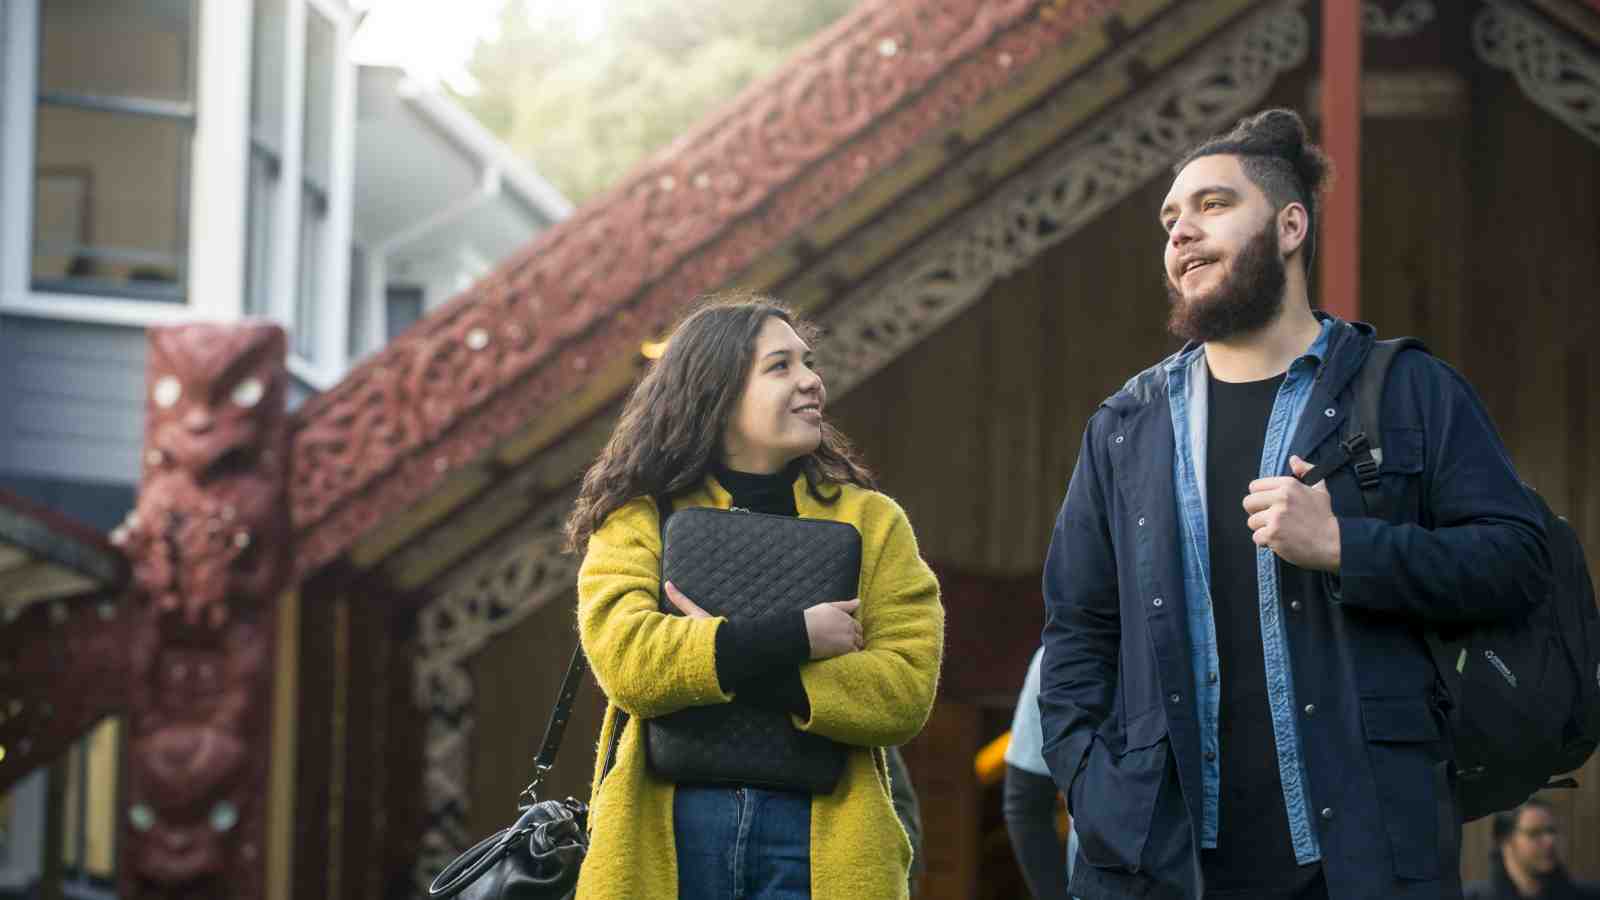 Jacob and Kayla talk in front of the Marae.